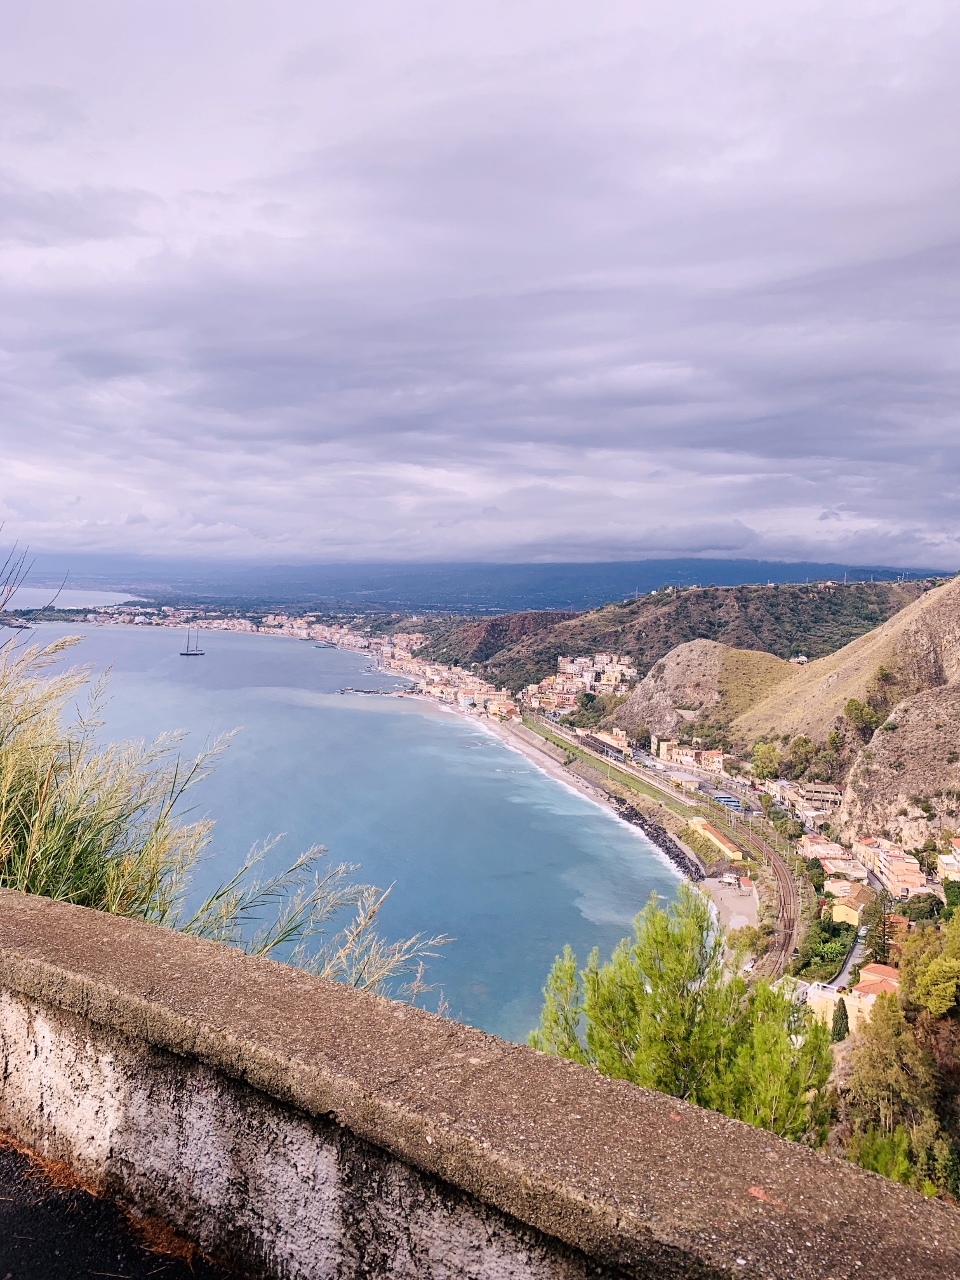 Travels to Sicily – Taormina, Mount Etna and Catania (Part 1 of 3) Image 1